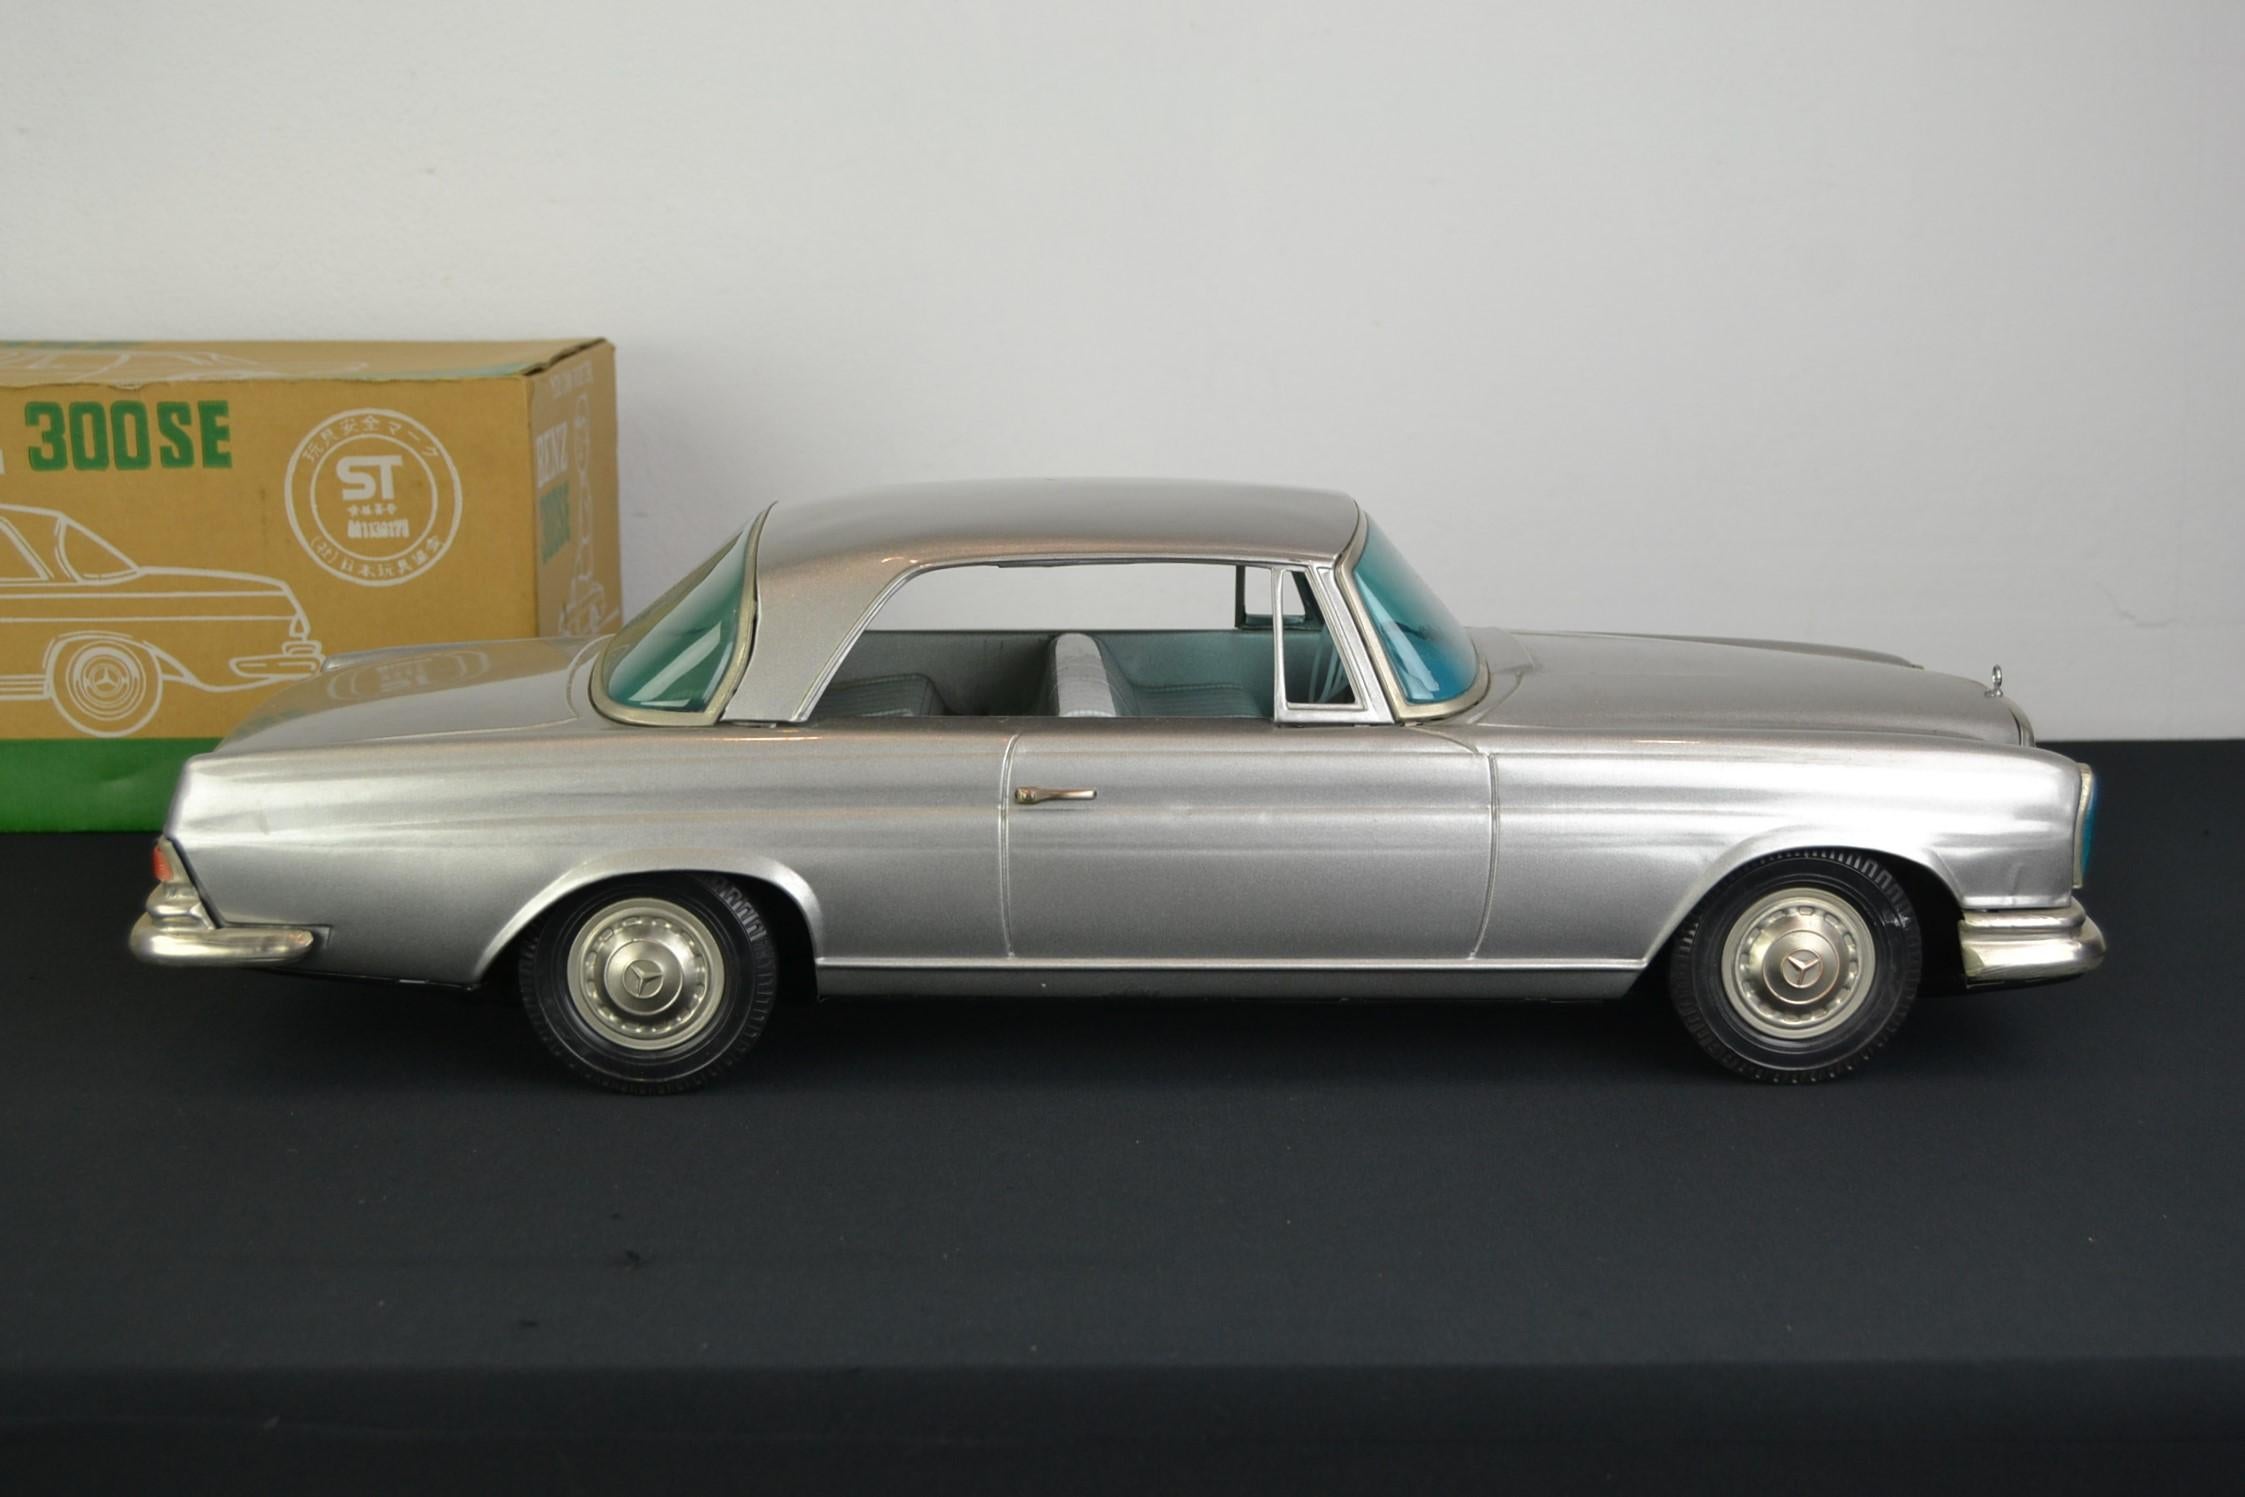 Boxed Mercedes Benz 300 SE Toy Model by Ichiko Japan, 1980s 7